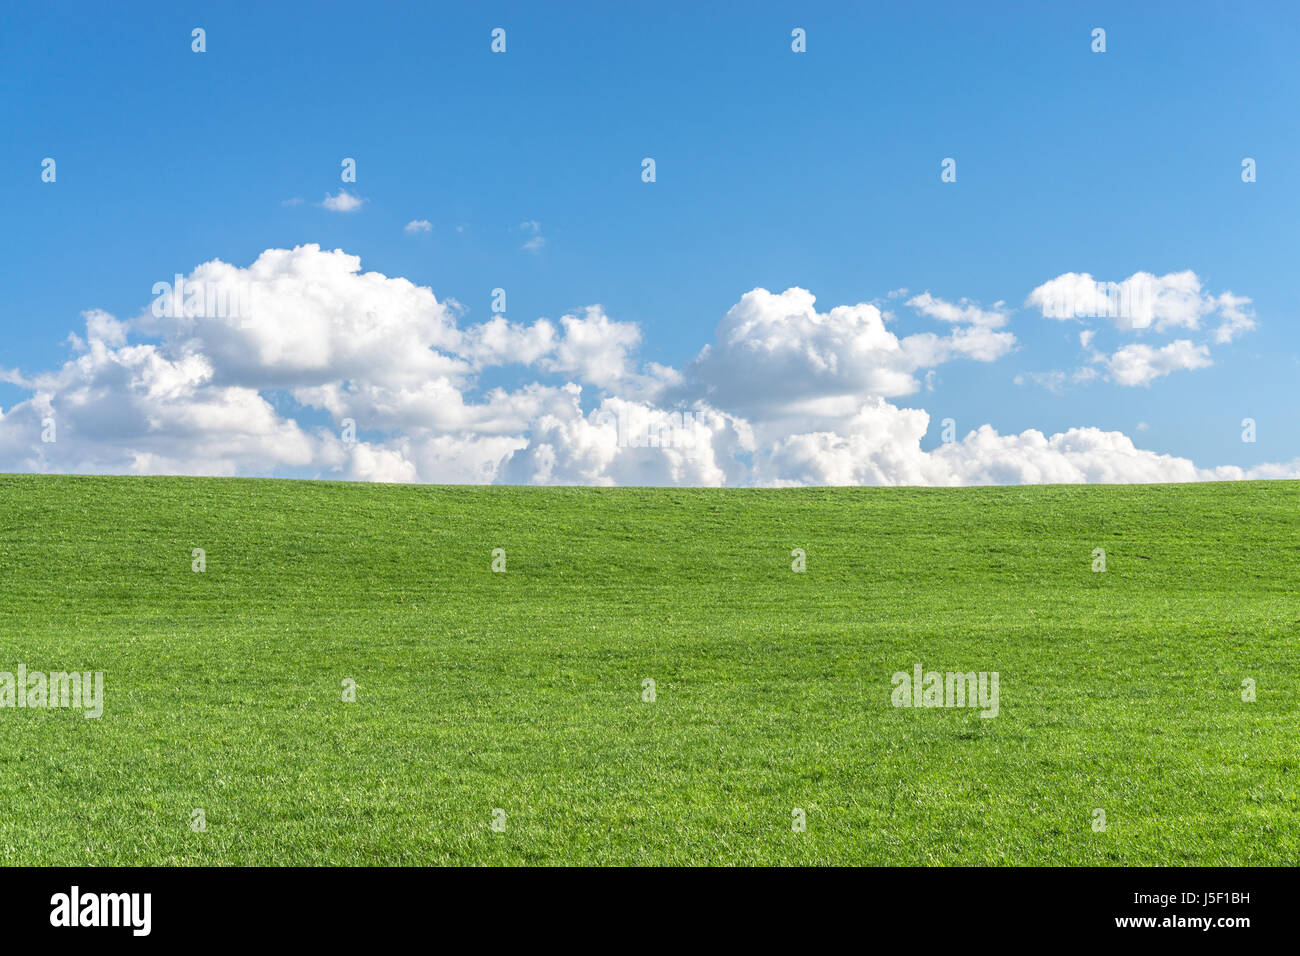 Green grass field with clear blue sky and white clouds Stock Photo